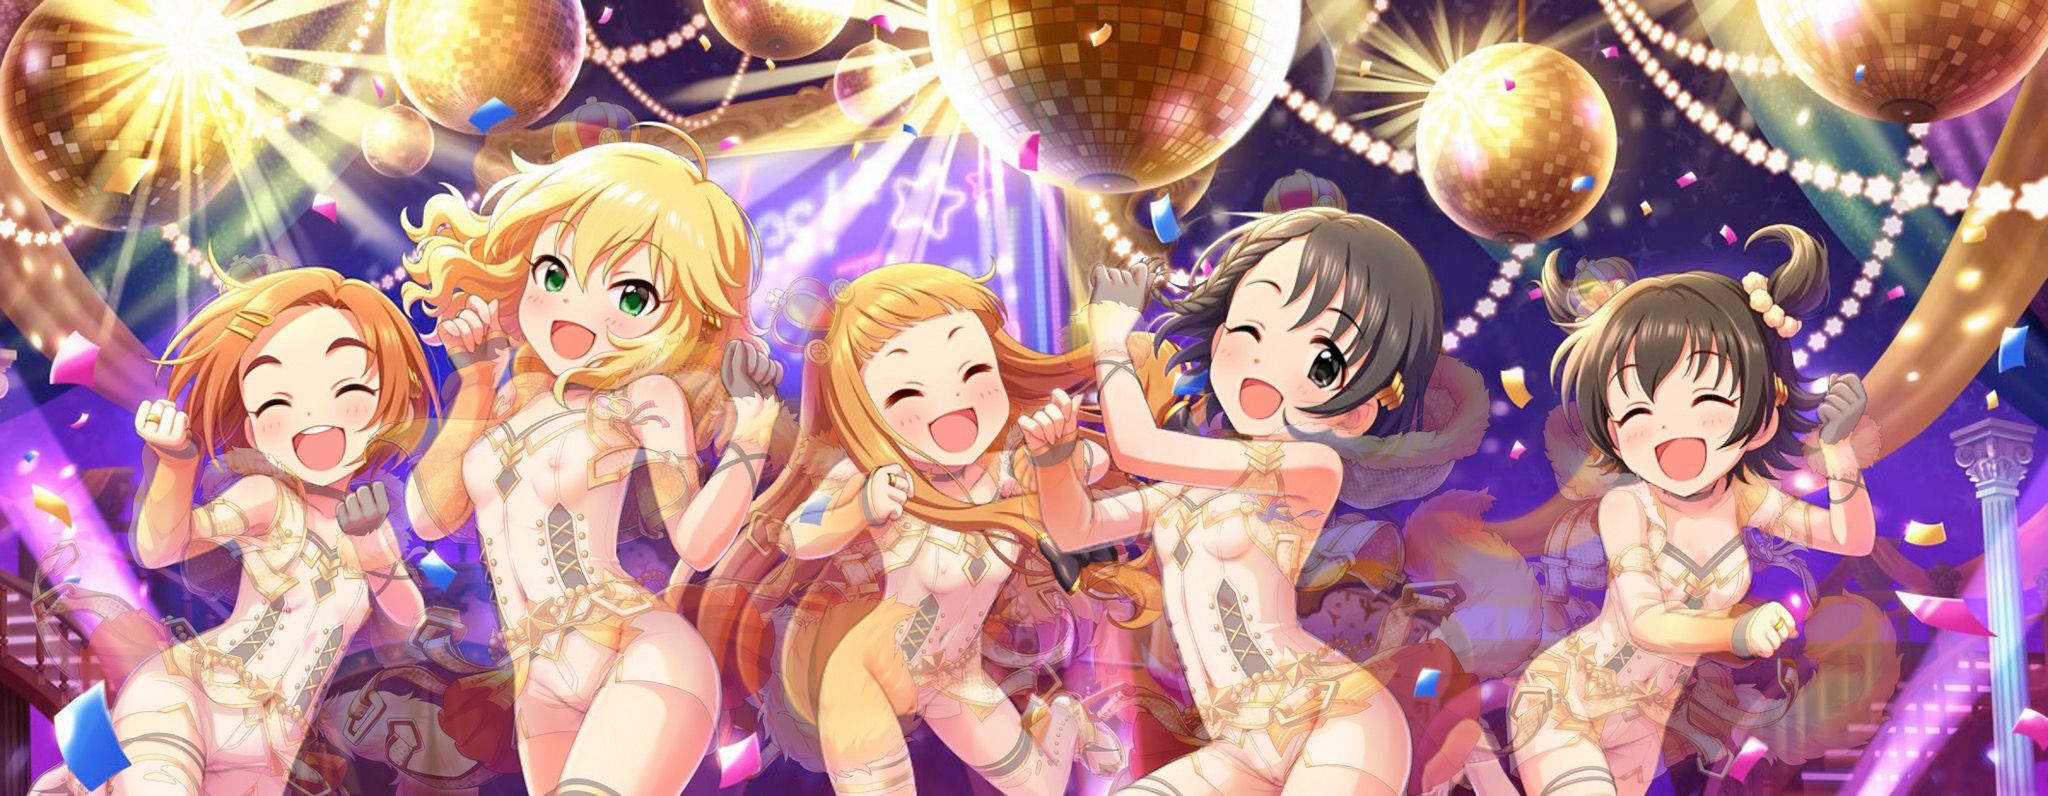 The Idolm @ ster Cinderella girls stripped off Photoshop part 41 10